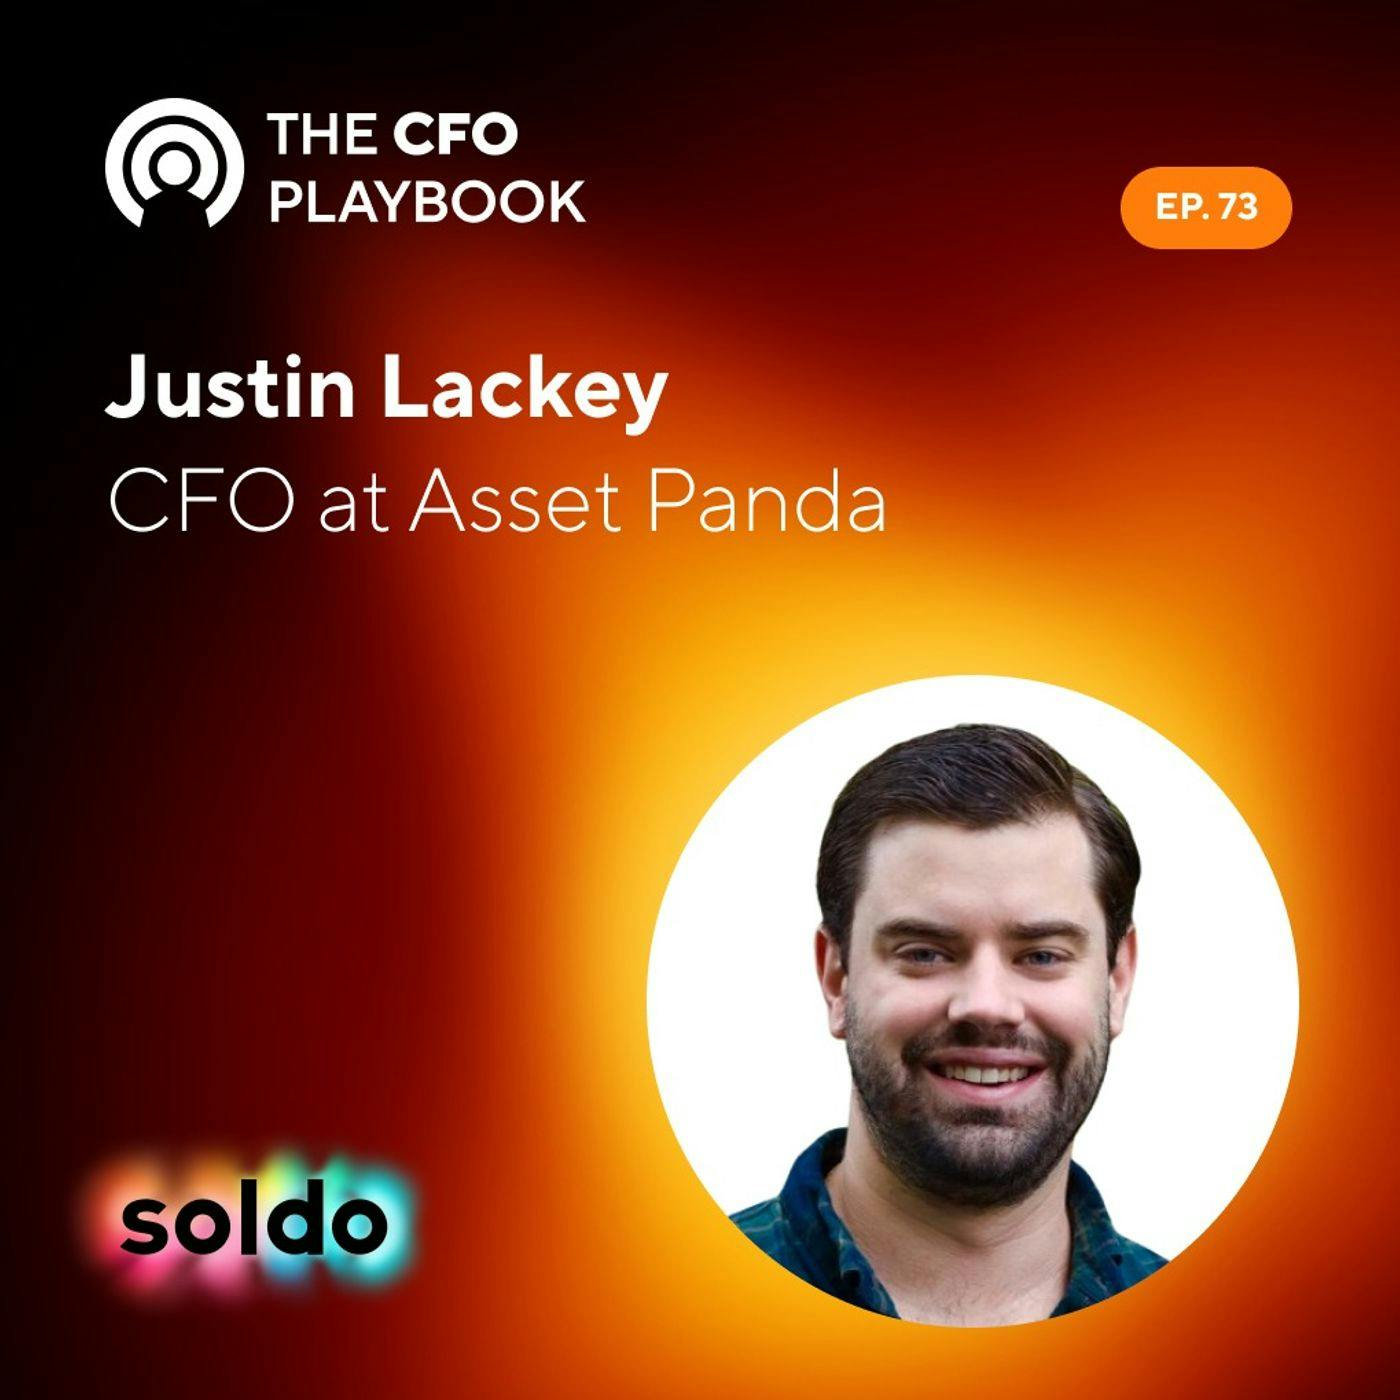 Finding a Balance Between Efficient and Effective with Justin Lackey, CFO at Asset Panda